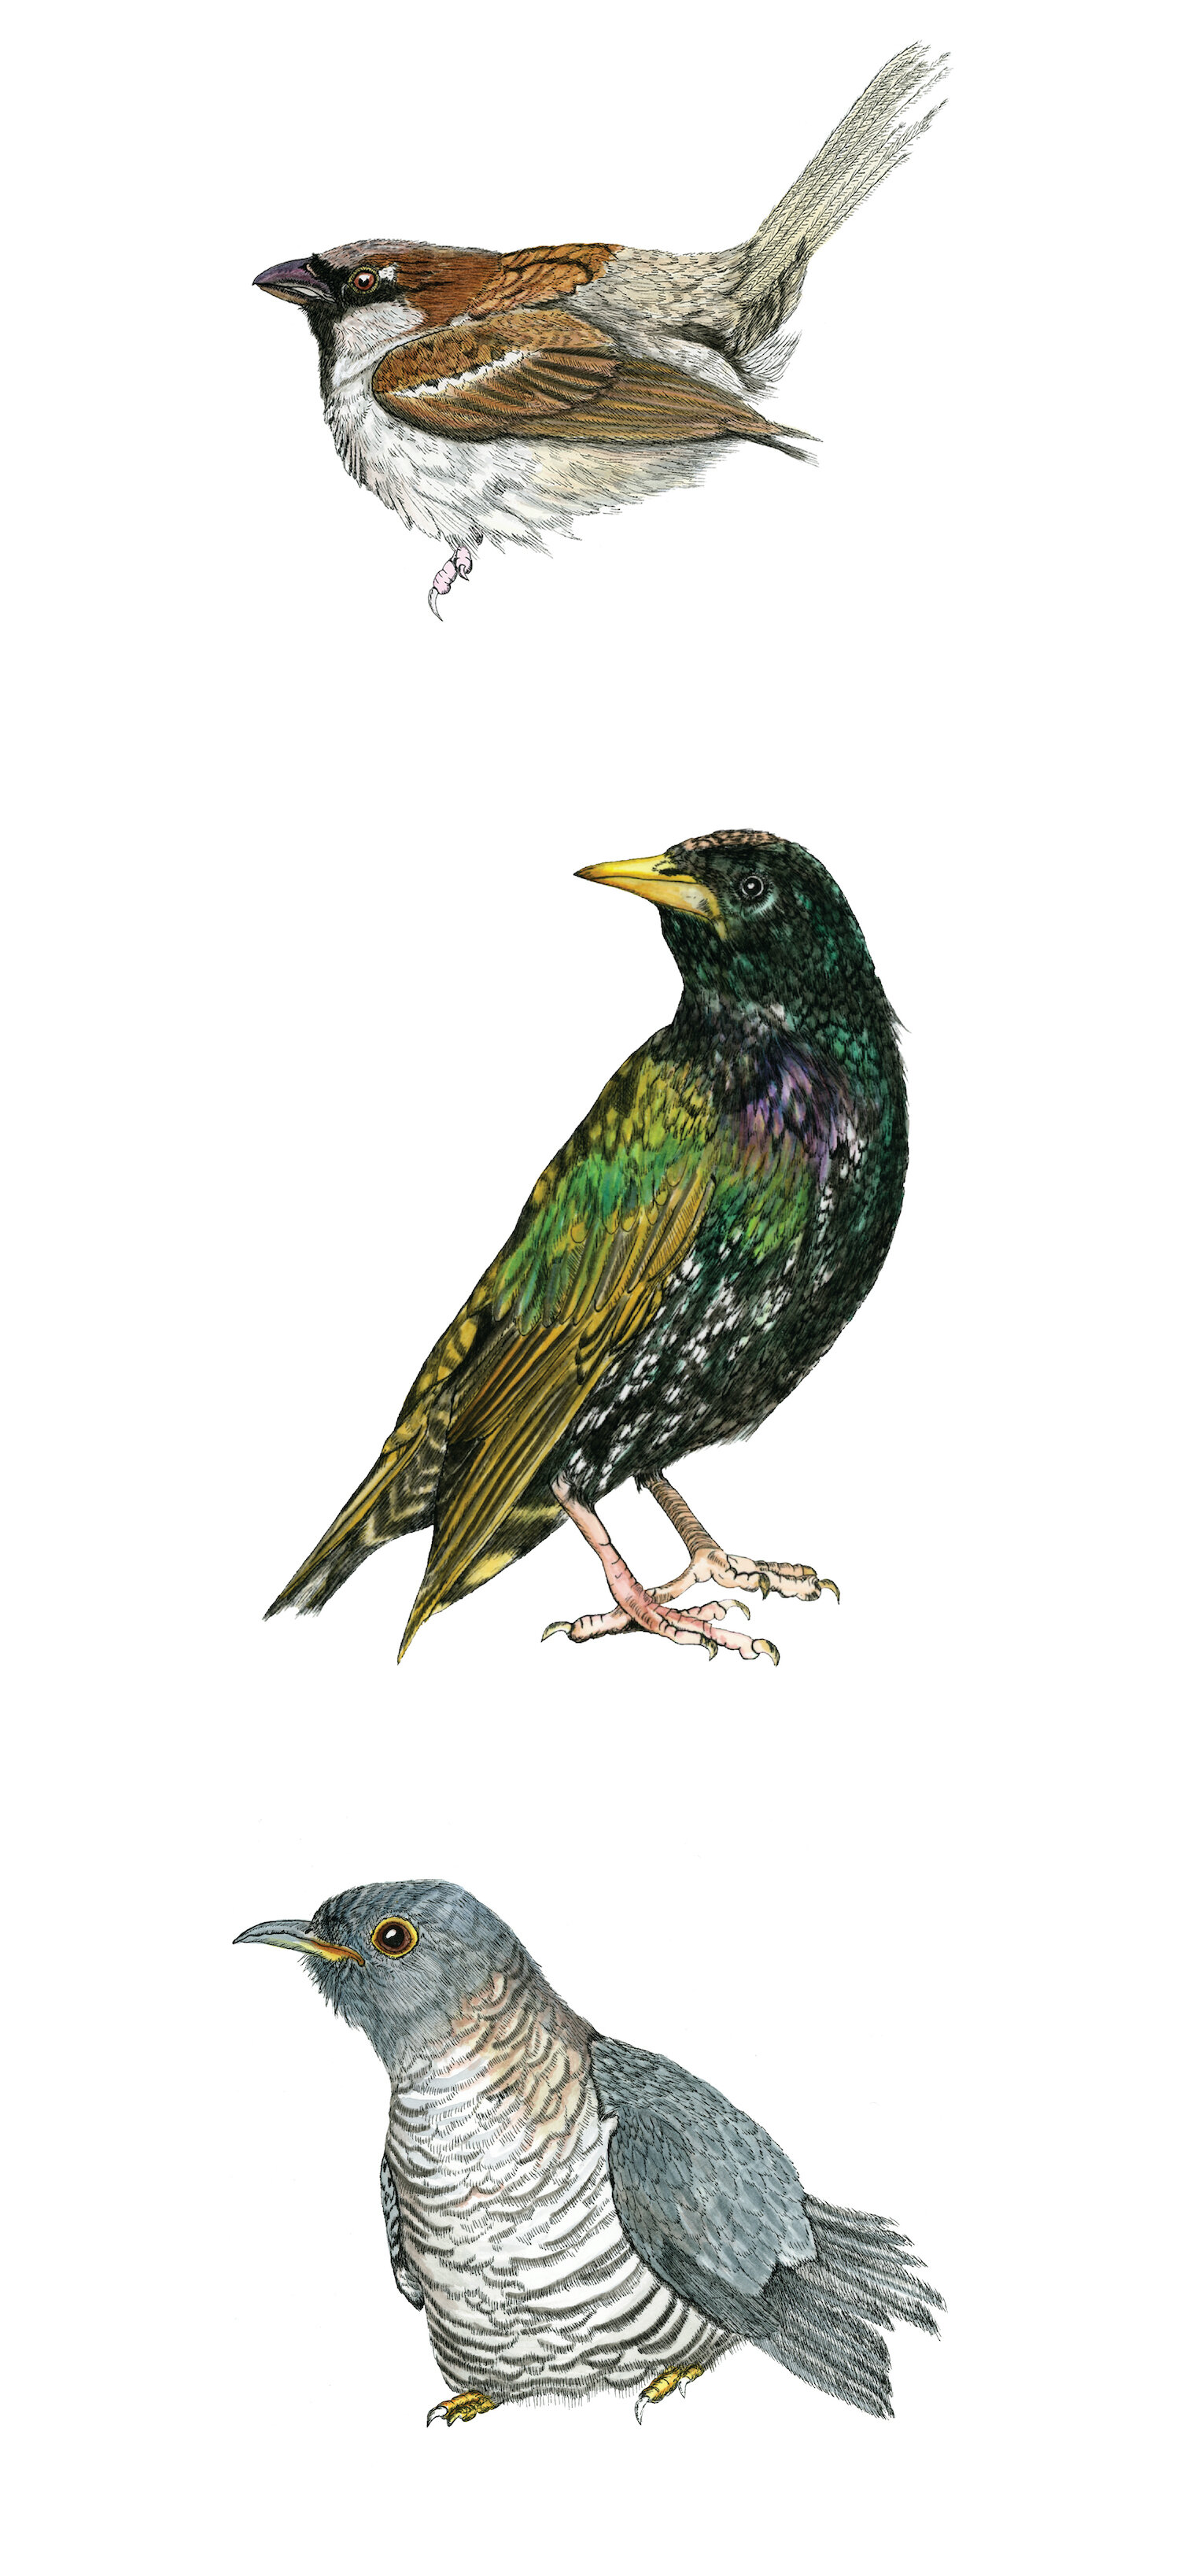   Shakespearean Invaders of North America.     Two of the most invasive species of birds in North America, starlings and house sparrows, where introduced in the late nineteenth century to honor Shakespeare. Most of his plays mention birds, which insp